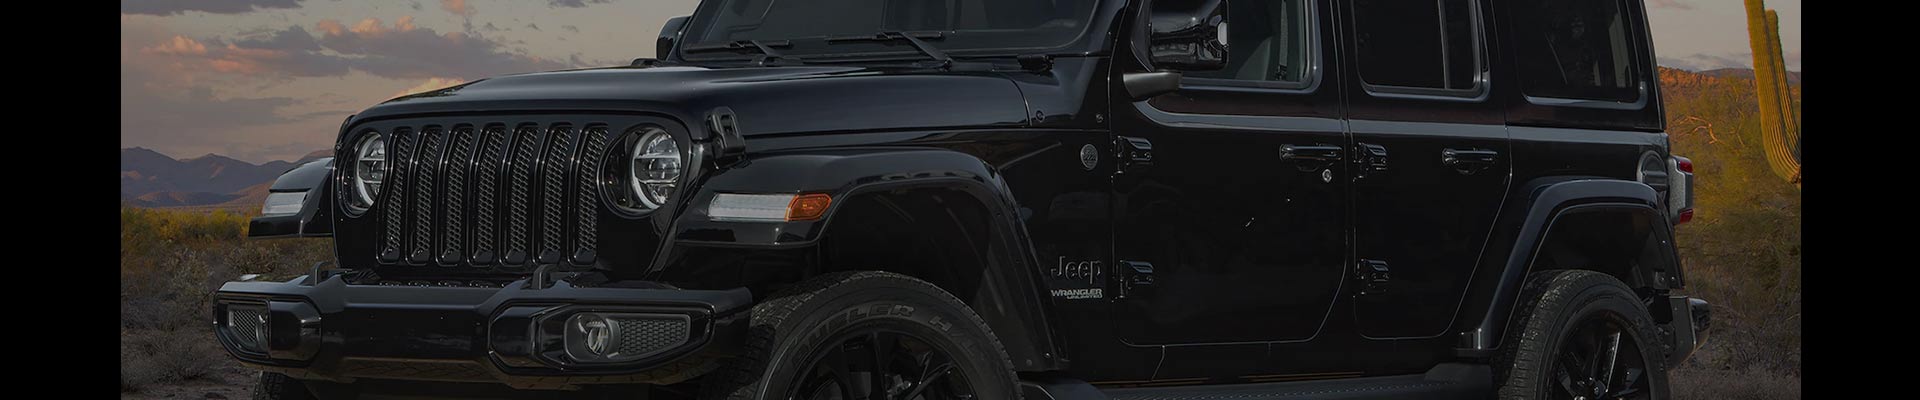 Shop Replacement and OEM 1991 Jeep Wrangler Parts with Discounted Price on the Net